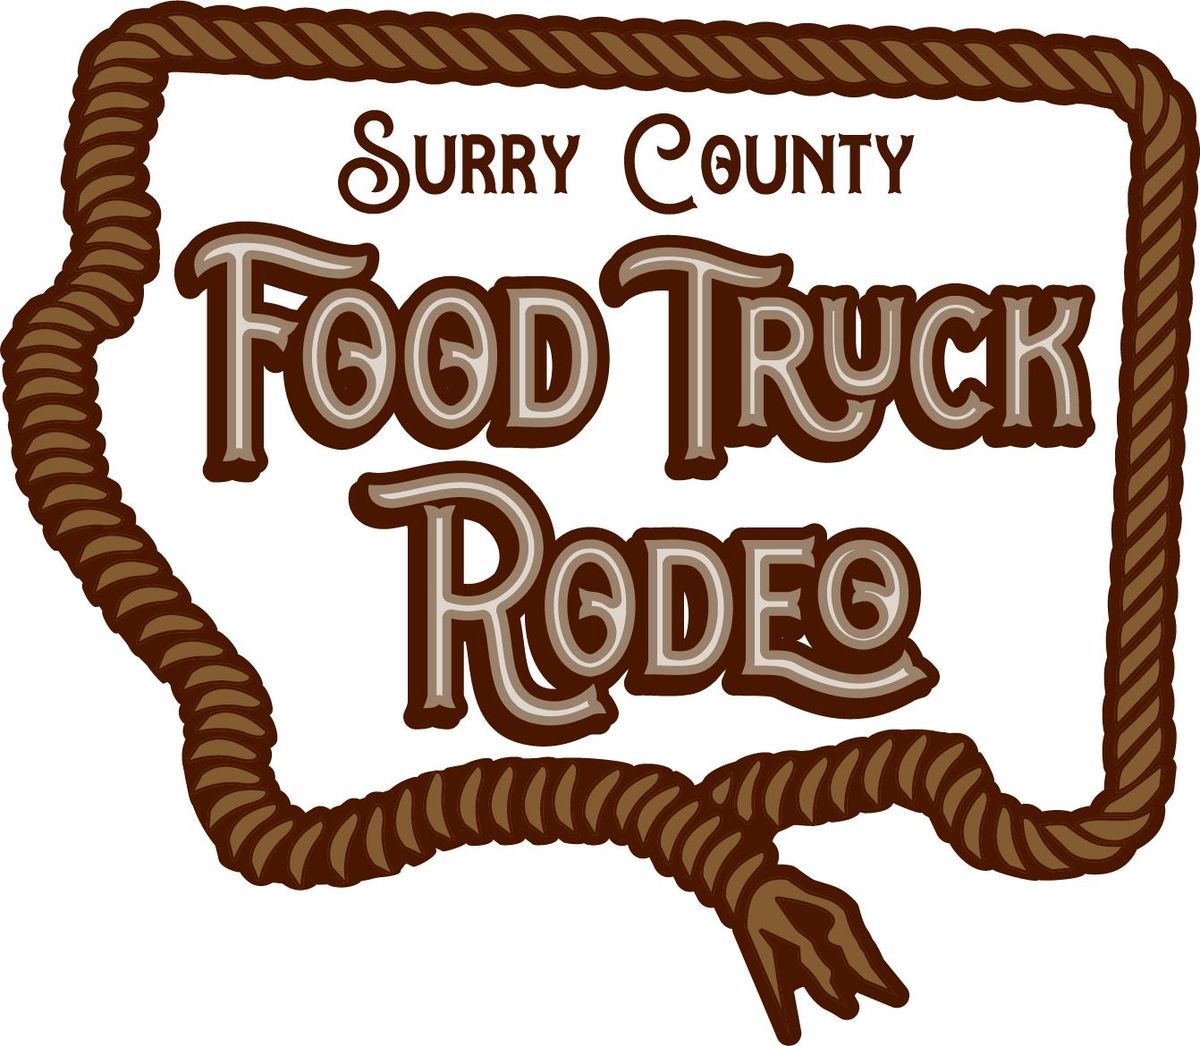 Surry County Food Truck Rodeo